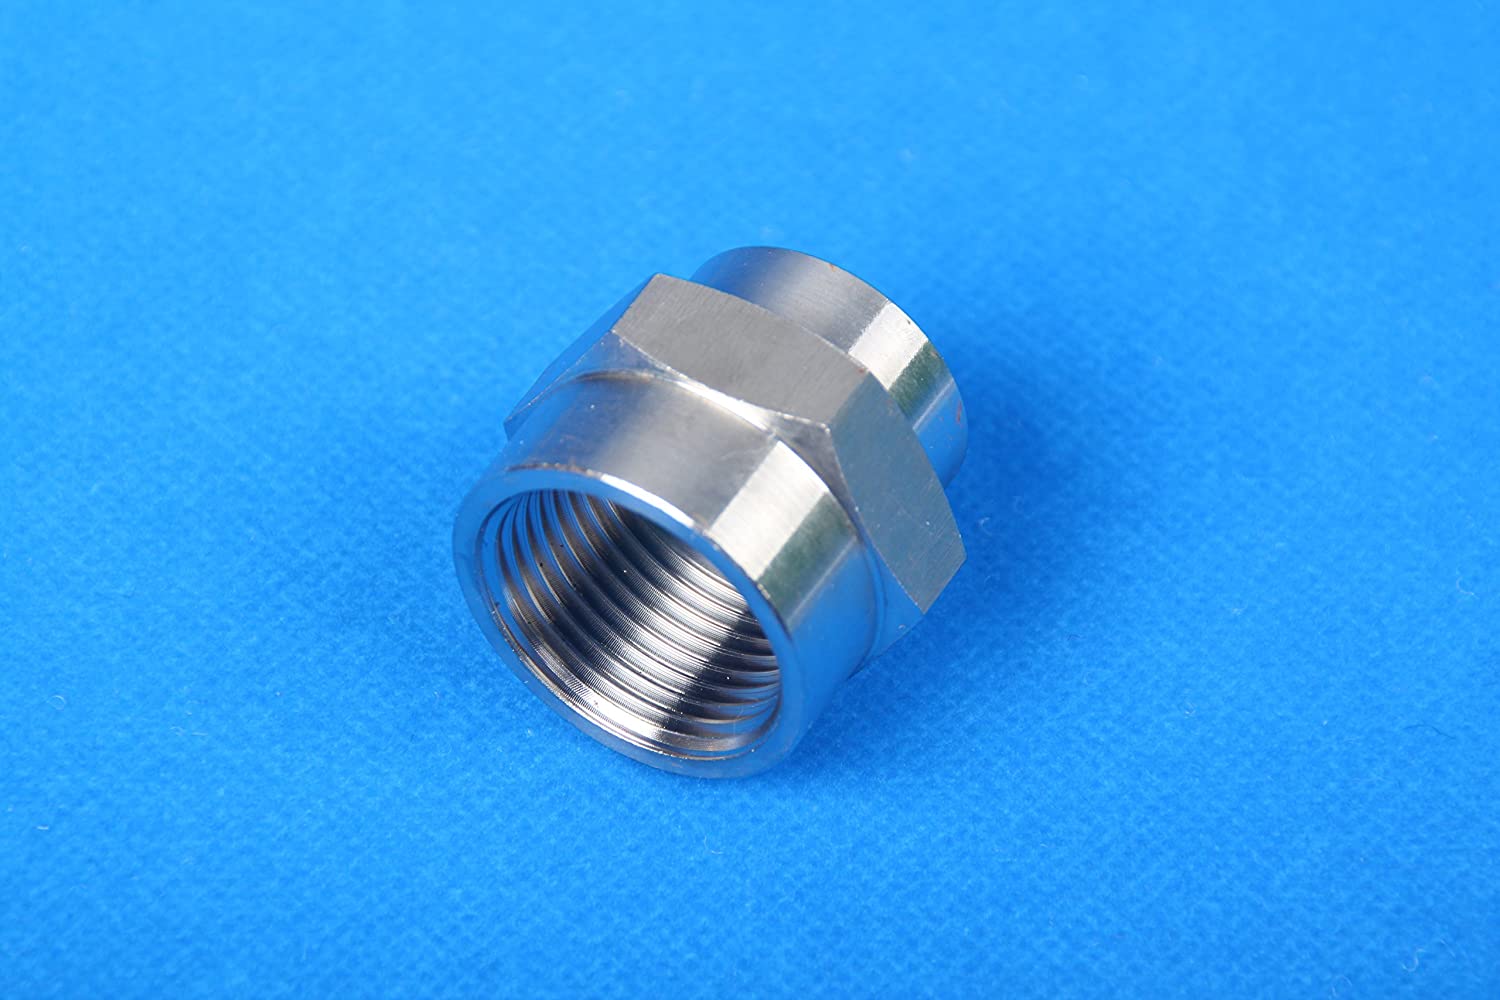 LTWFITTING Bar Production Stainless Steel 316 Pipe Fitting 3/4 Inch x 1/2 Inch Female NPT Reducing Coupling Water Boat (Pack of 200)